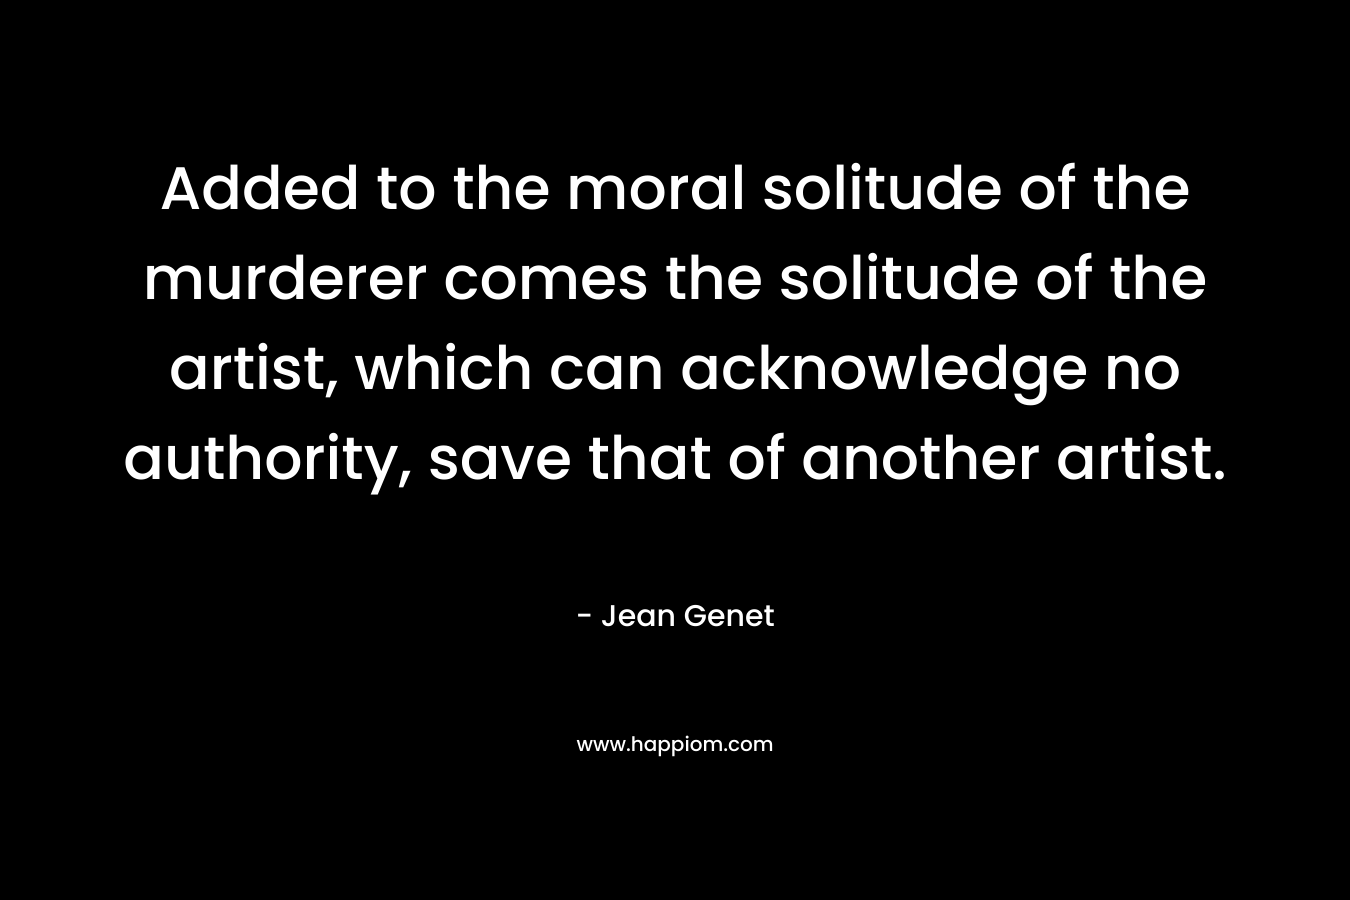 Added to the moral solitude of the murderer comes the solitude of the artist, which can acknowledge no authority, save that of another artist. – Jean Genet